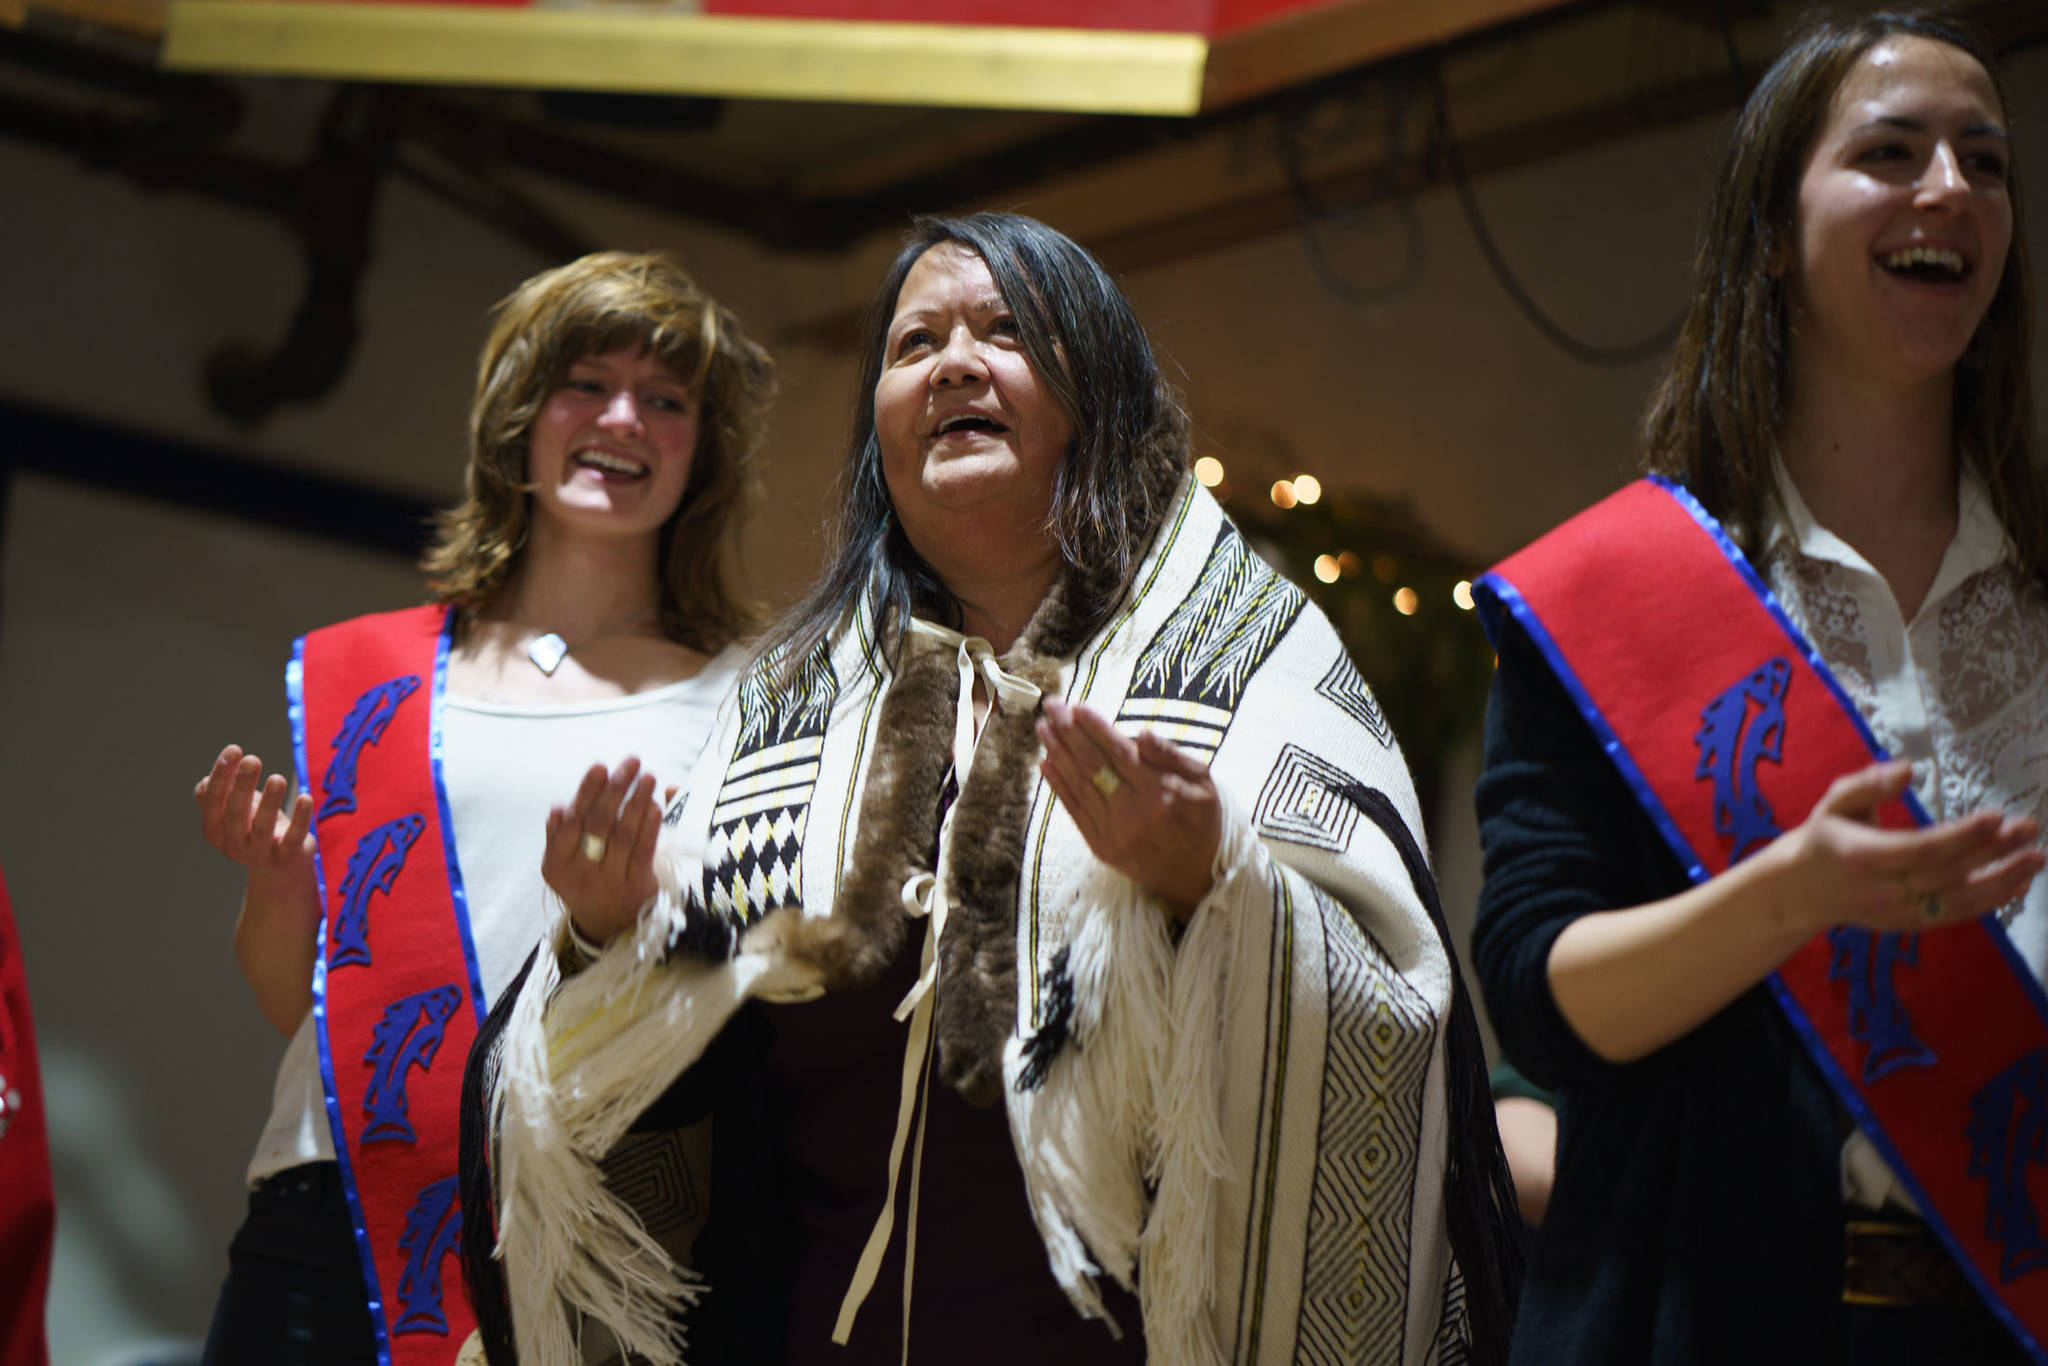 Louise Brady dons the Herring Robe, woven by Teri Rofkar to perform the herring dance at Sunday’s koo.eex’ beside Herring Rock Water Protectors Elsa Sebastian and Tiffany Justice. Photo by Bethany Goodrich.